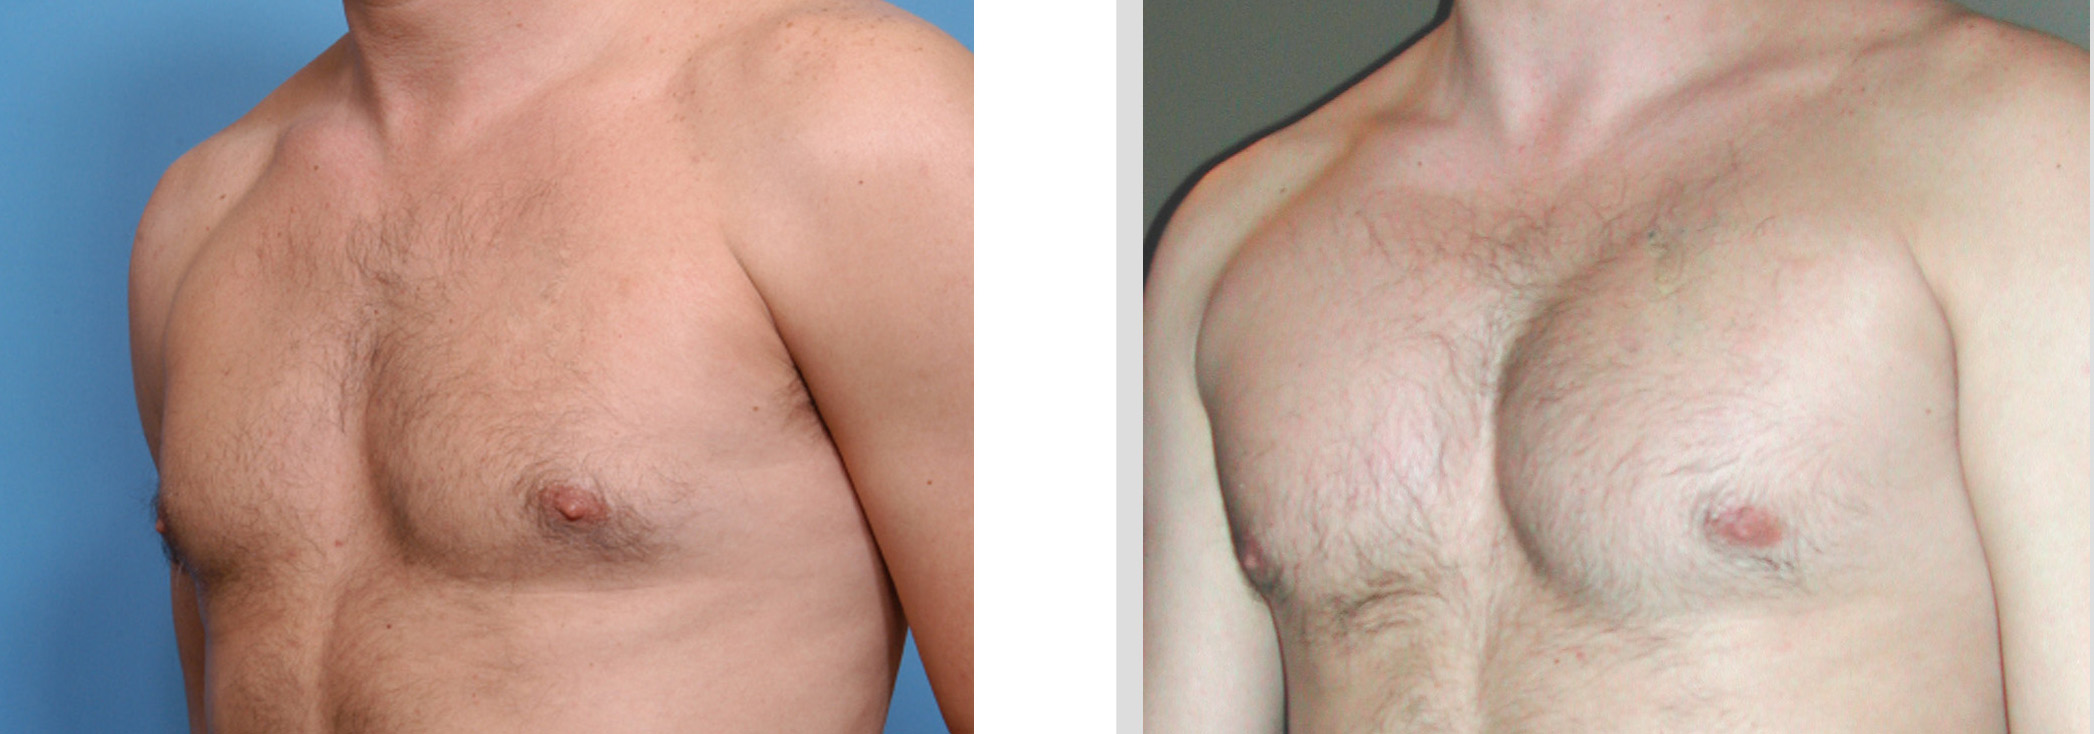 Male Chest Enlargement, Pectoral Shaping for Men